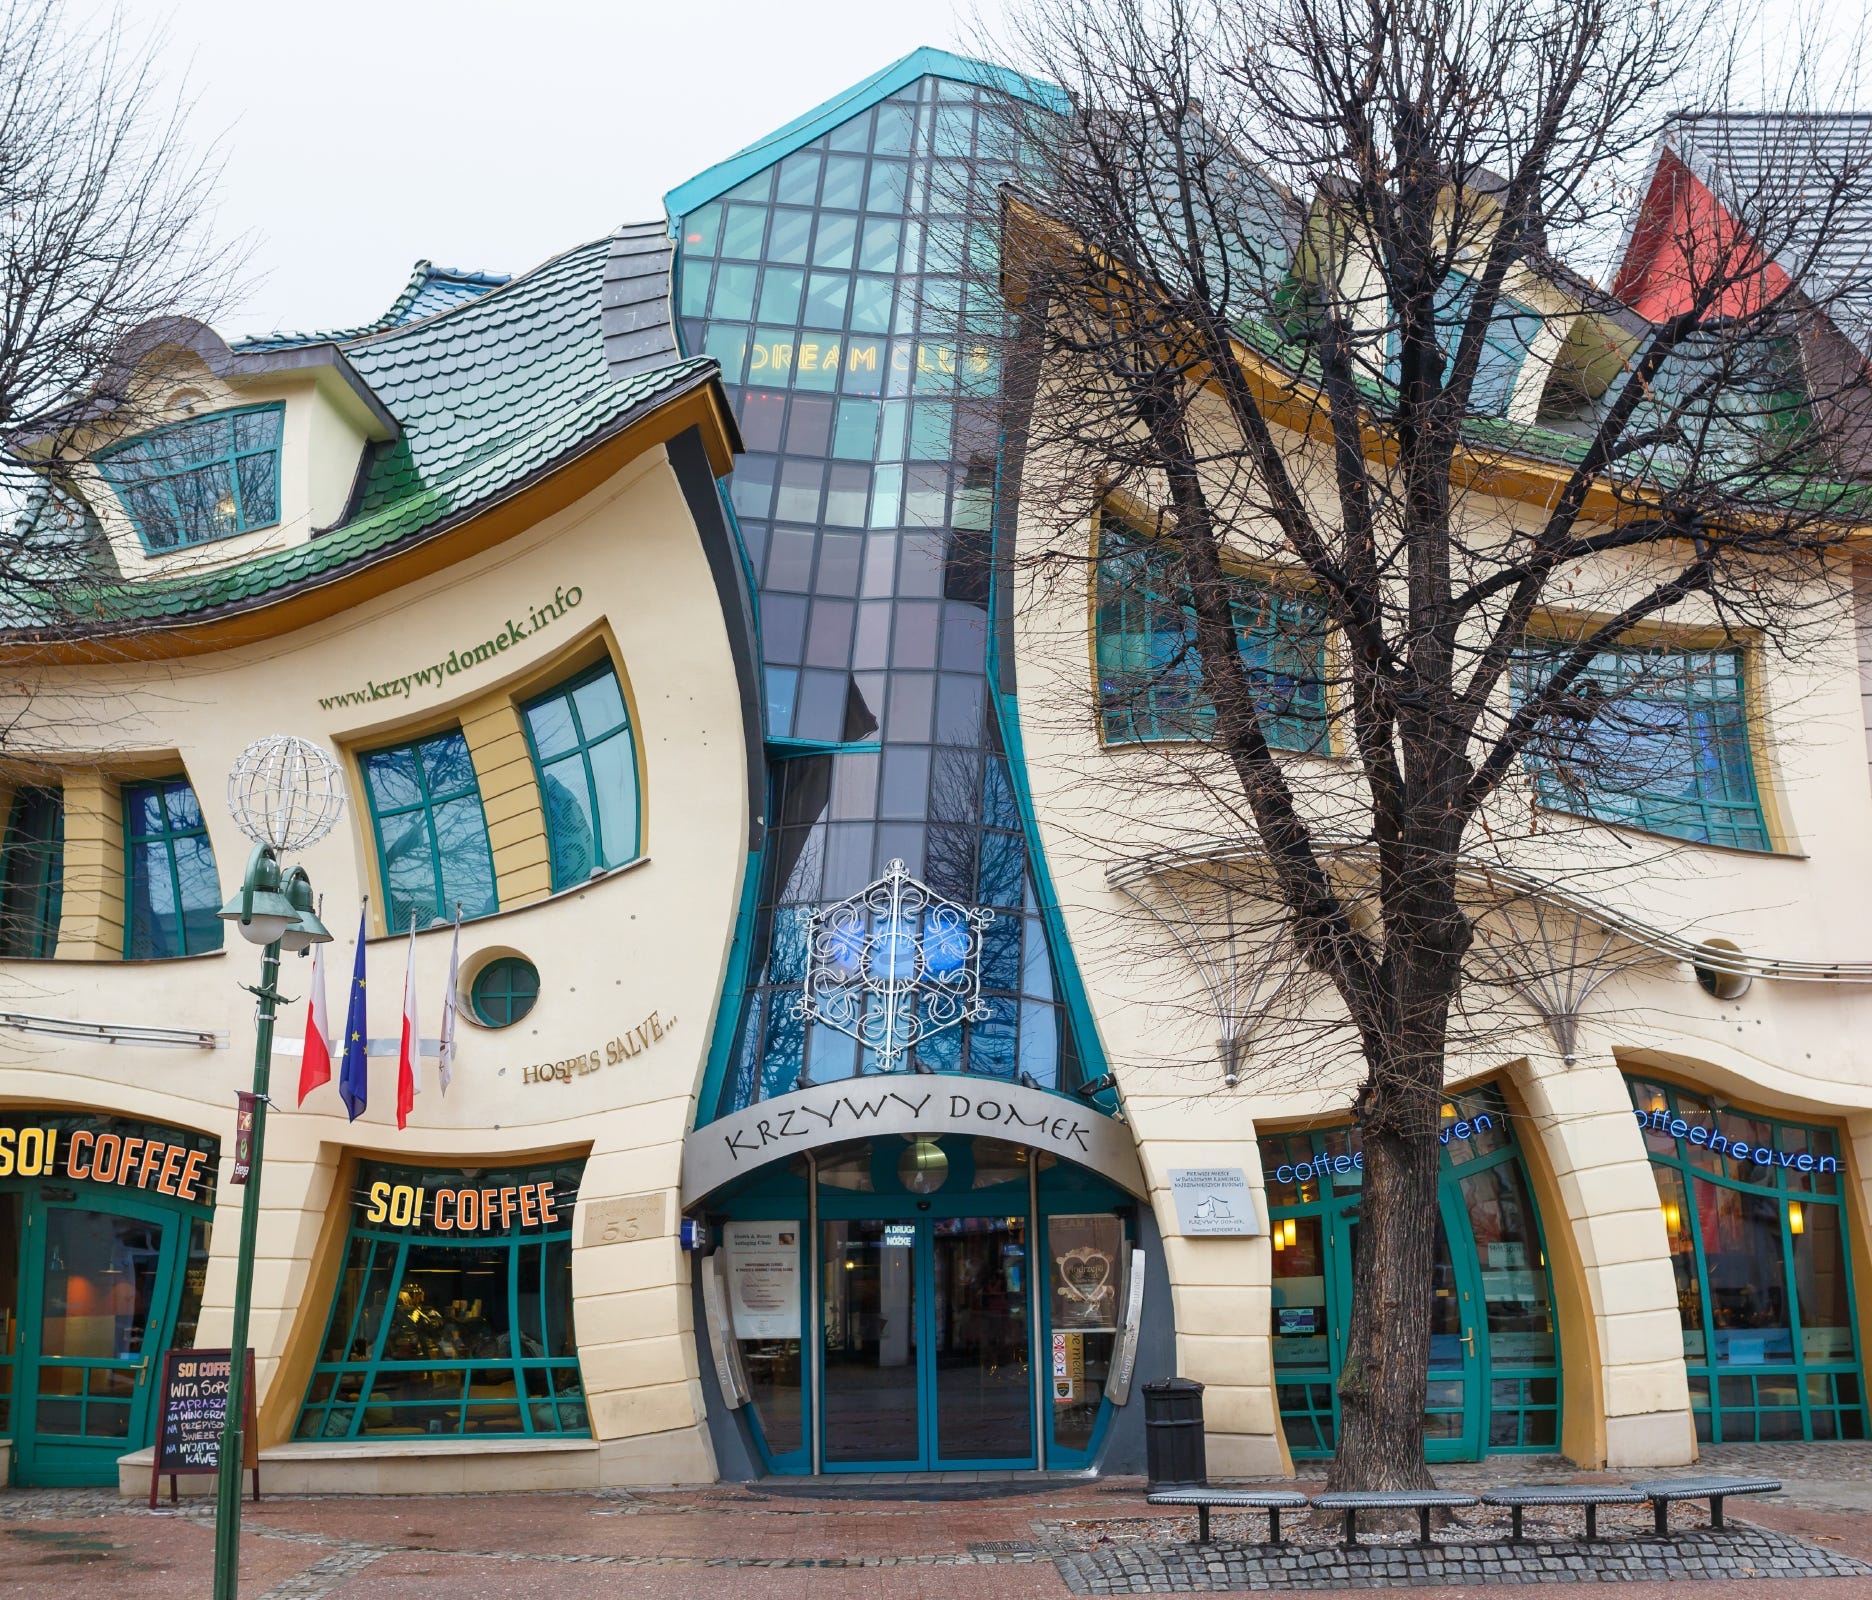 The Crooked House, Monte Cassino, Poland: As if to show how the mundane can become marvelous, the Crooked House is a building on a normal shopping street in this seaside town, and it hosts a mall with restaurants, shops and businesses. Rather than go